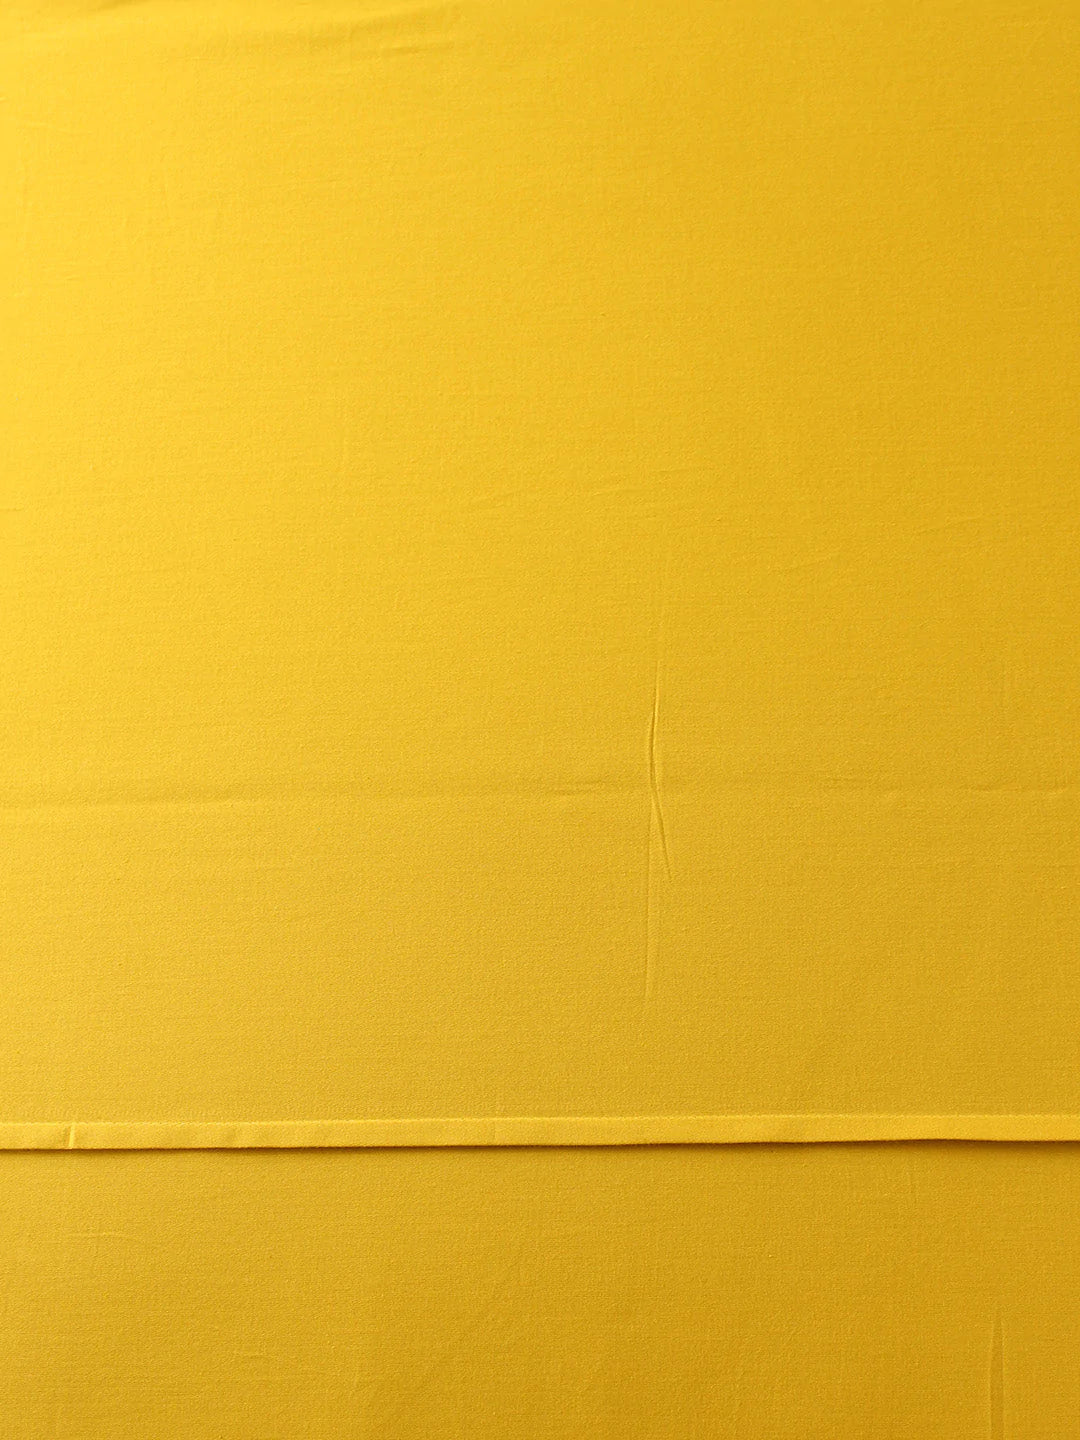 Piyambu Yellow Fitted Sheet with Pillow Cover